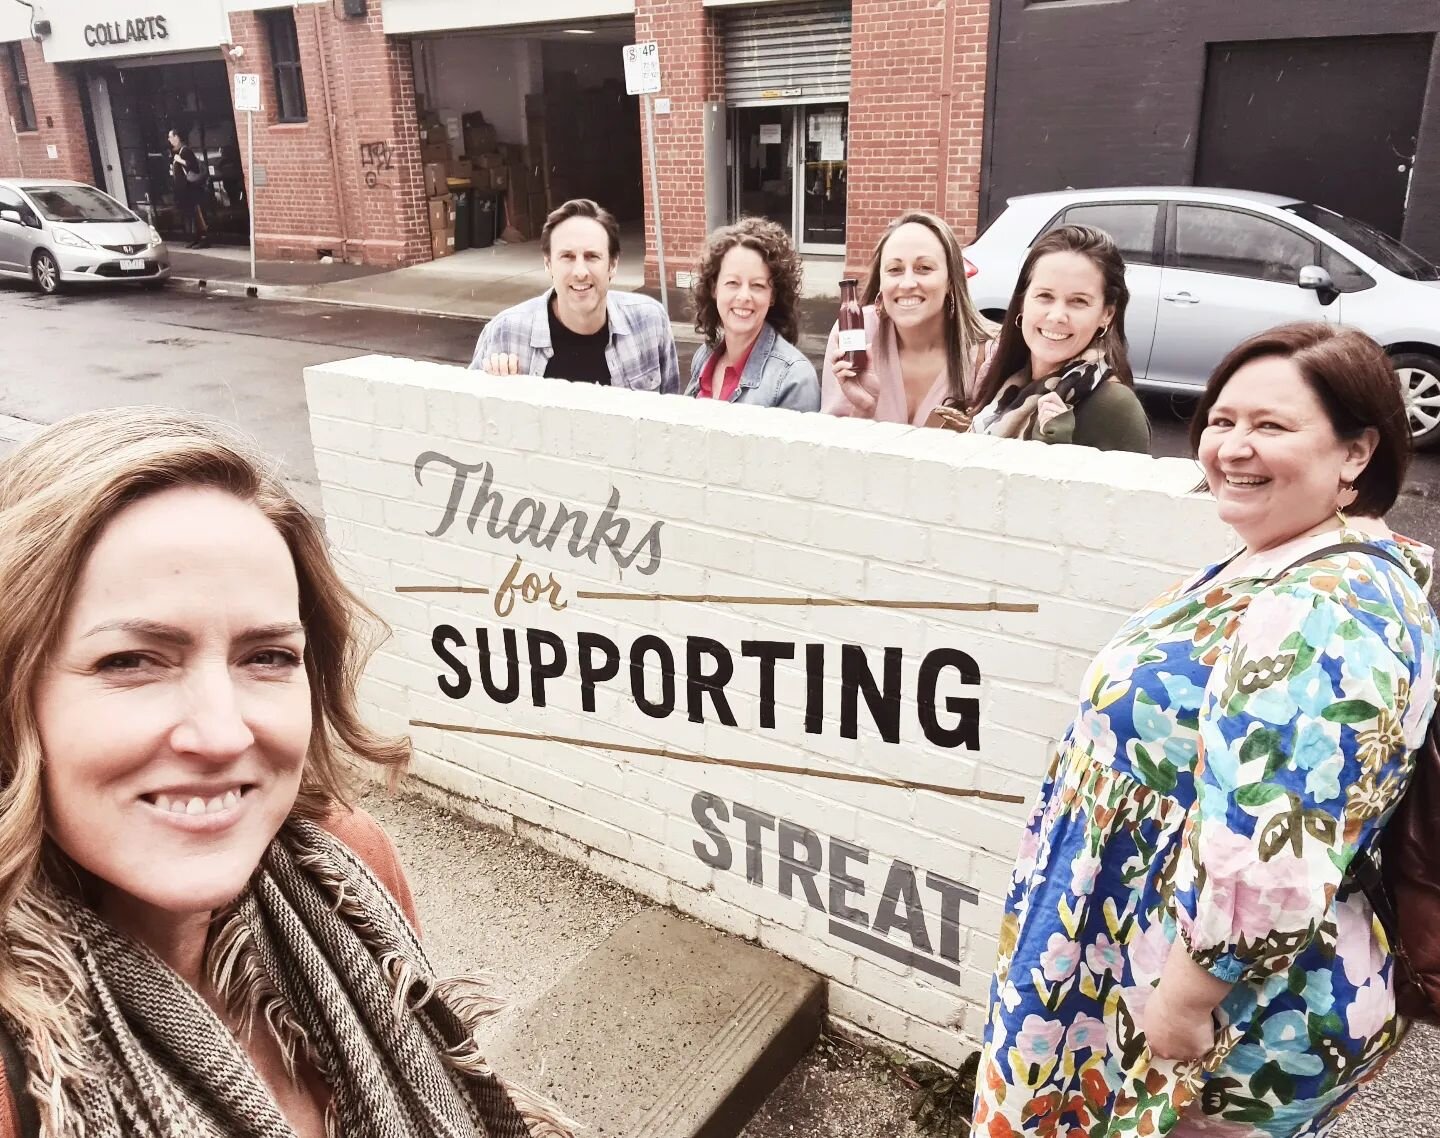 Lovely lunch with some of our most charitable Producers from the @_positive_feeds_ community. How lucky are we to have met so many beautiful bright people during such dark days...life is funny that way.

Lunch at @streatmelbourne was the perfect choi